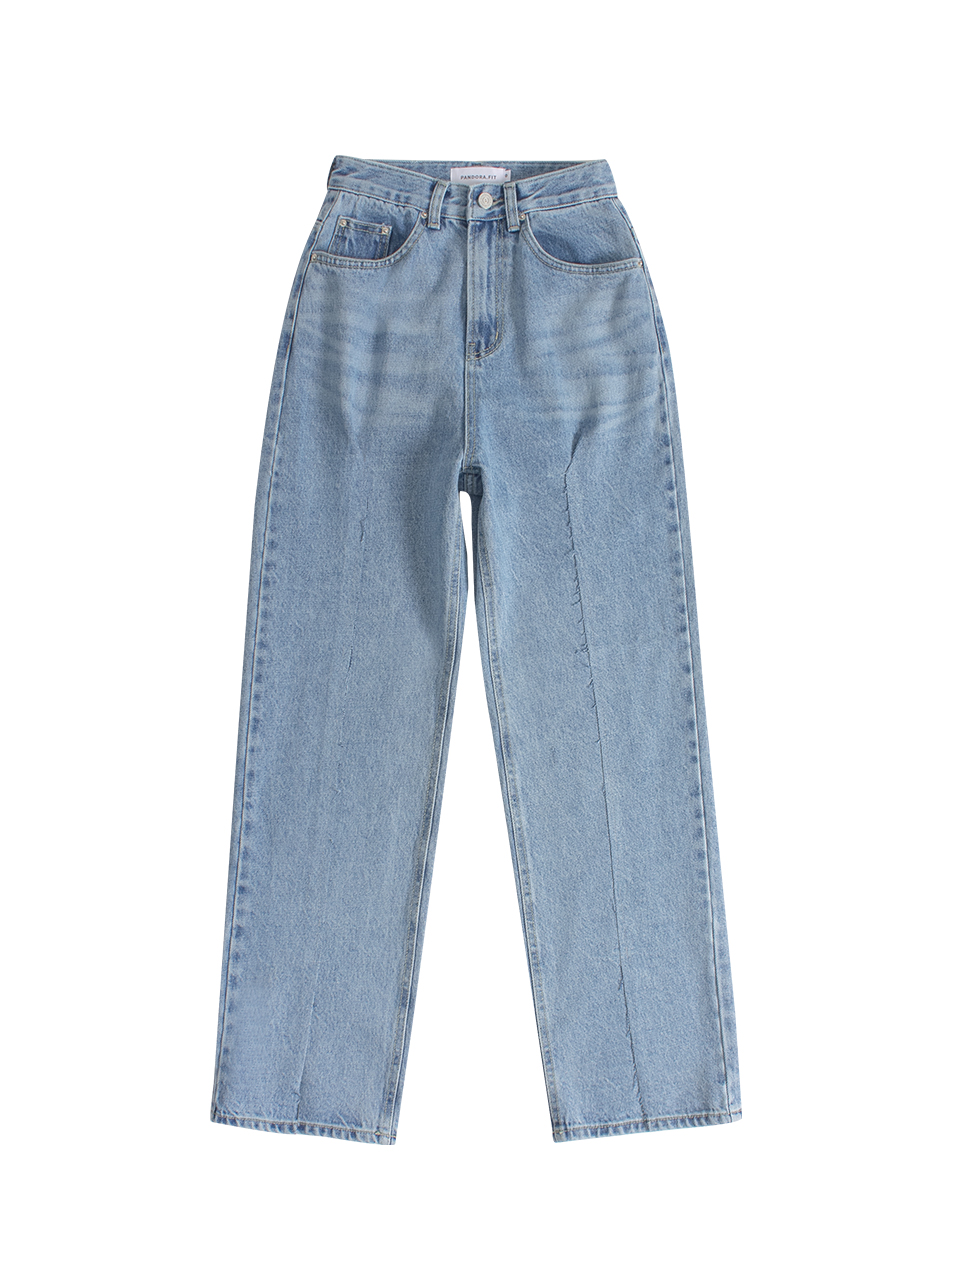 [WIDE] Road Jeans